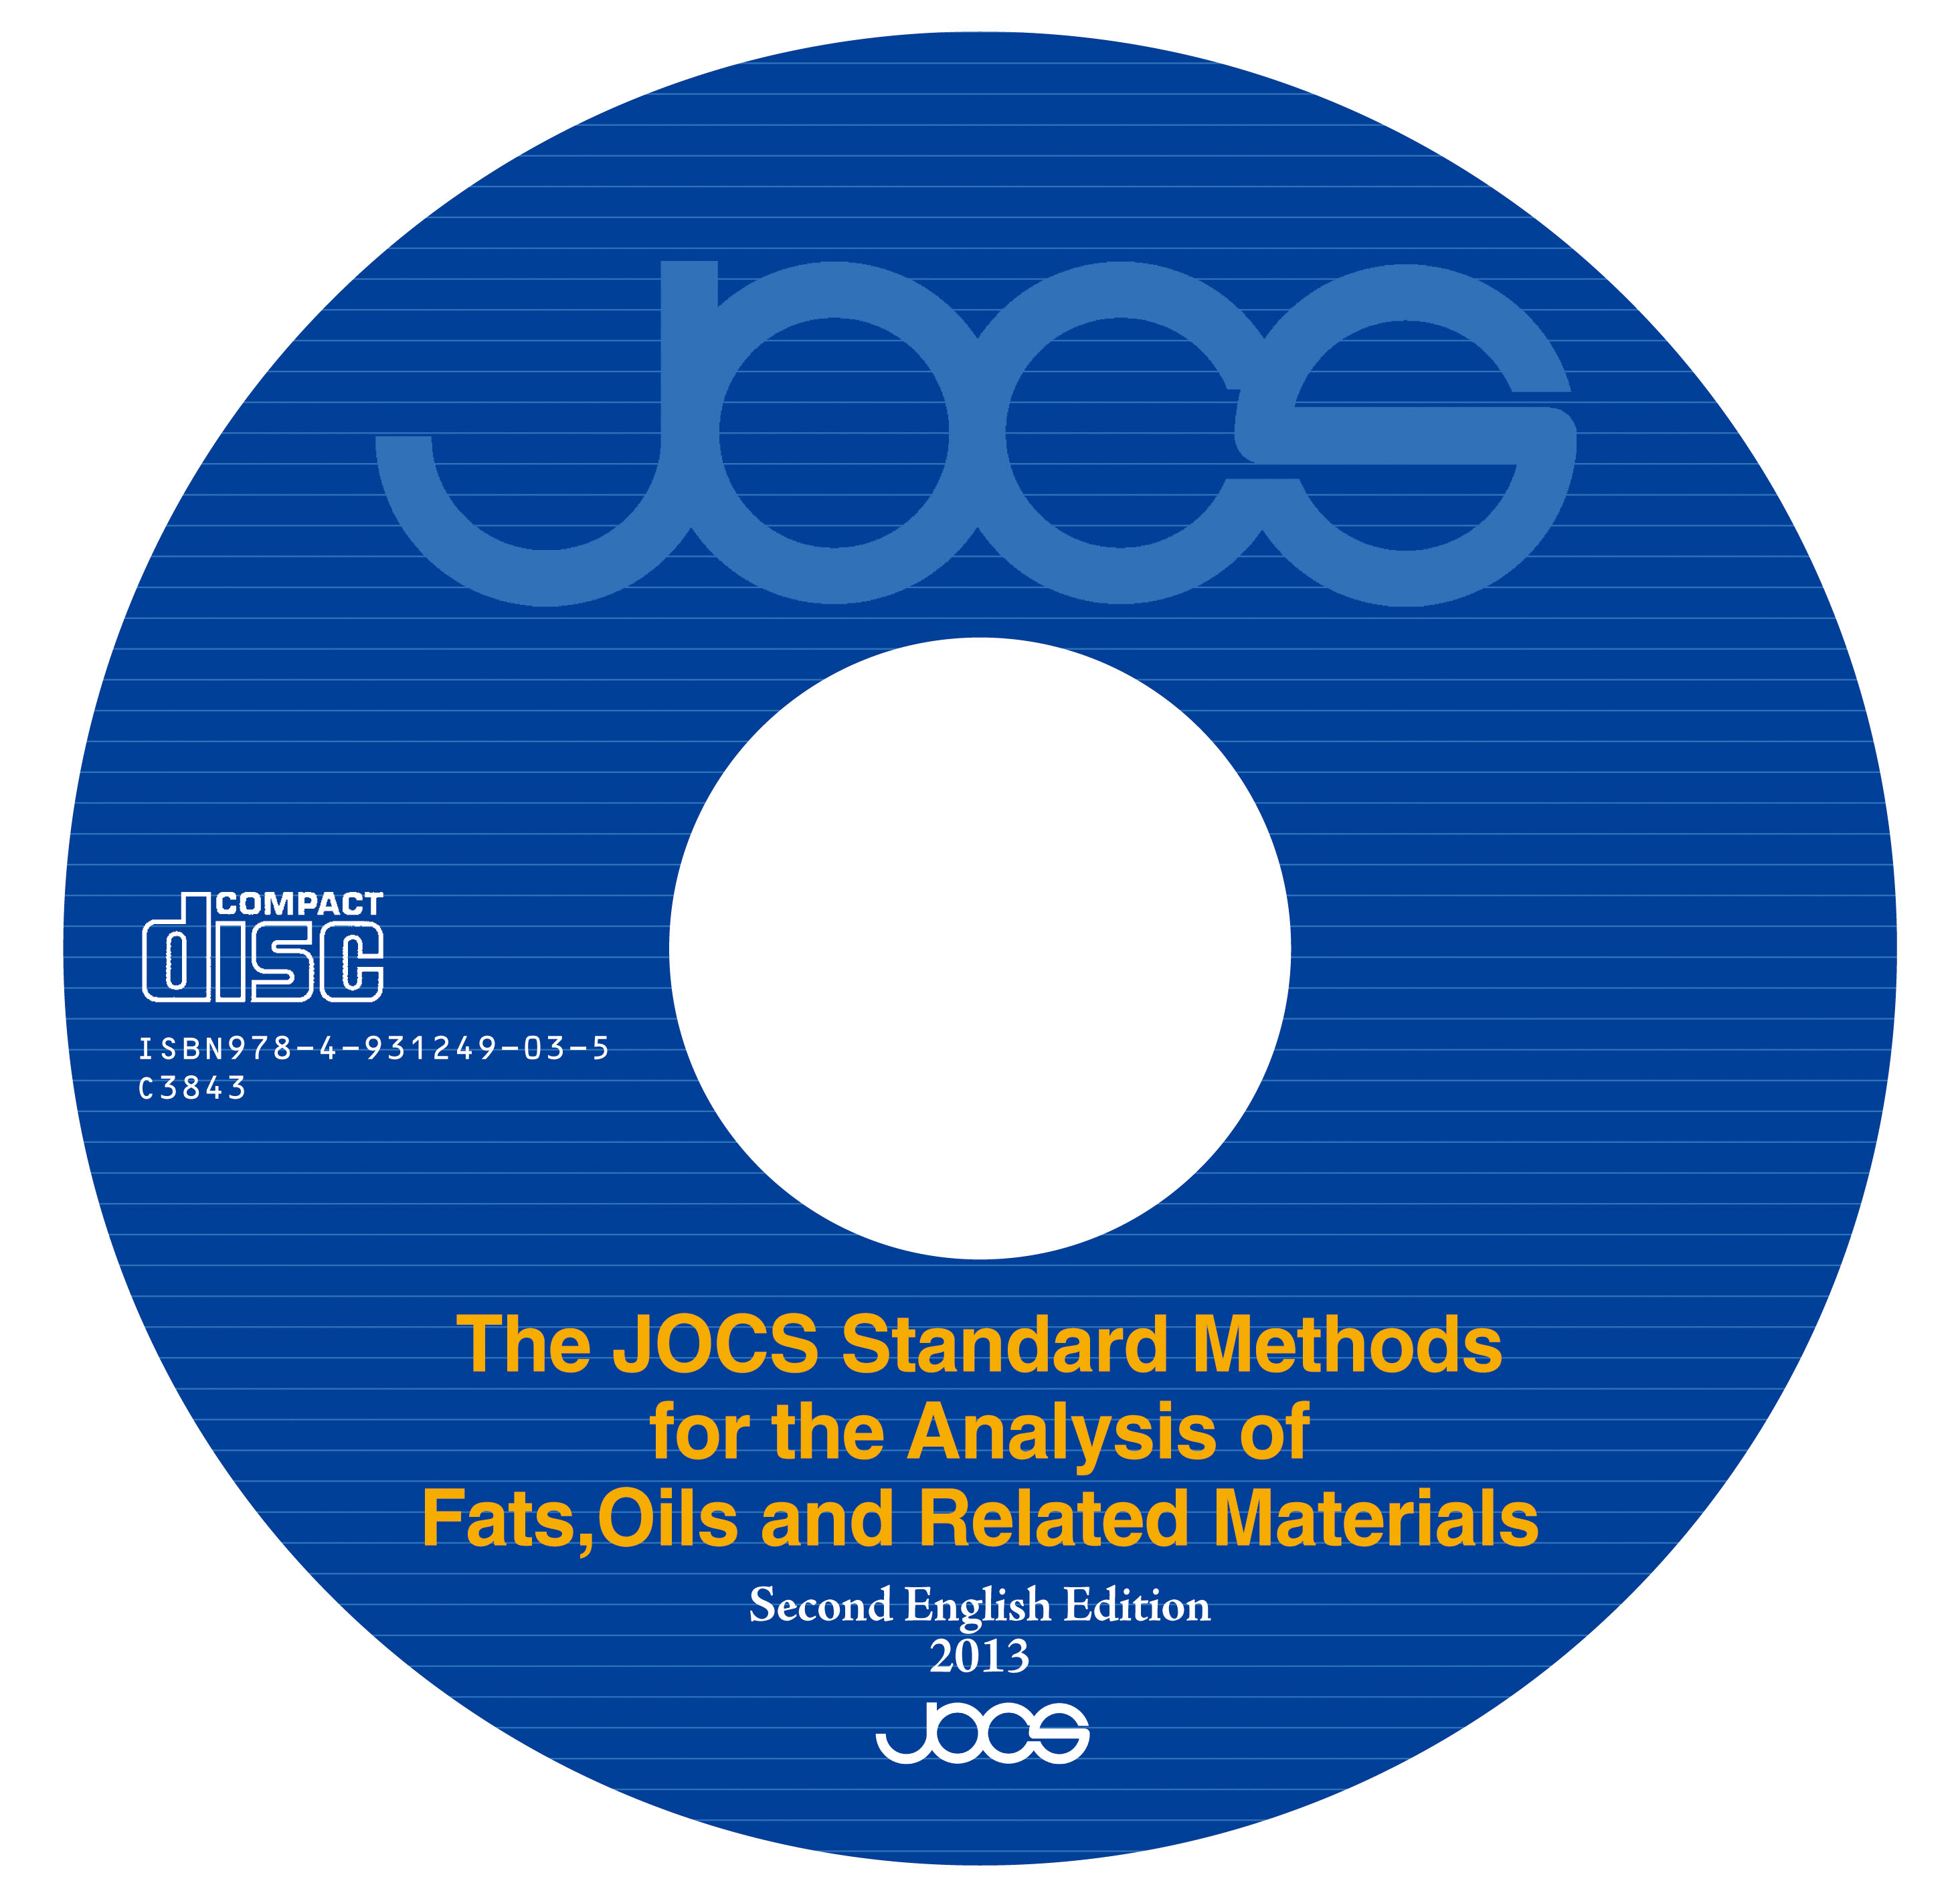 The JOCS Standard Methods for the Analysis of Fats, Oils and Related Materials First English Edition 2013